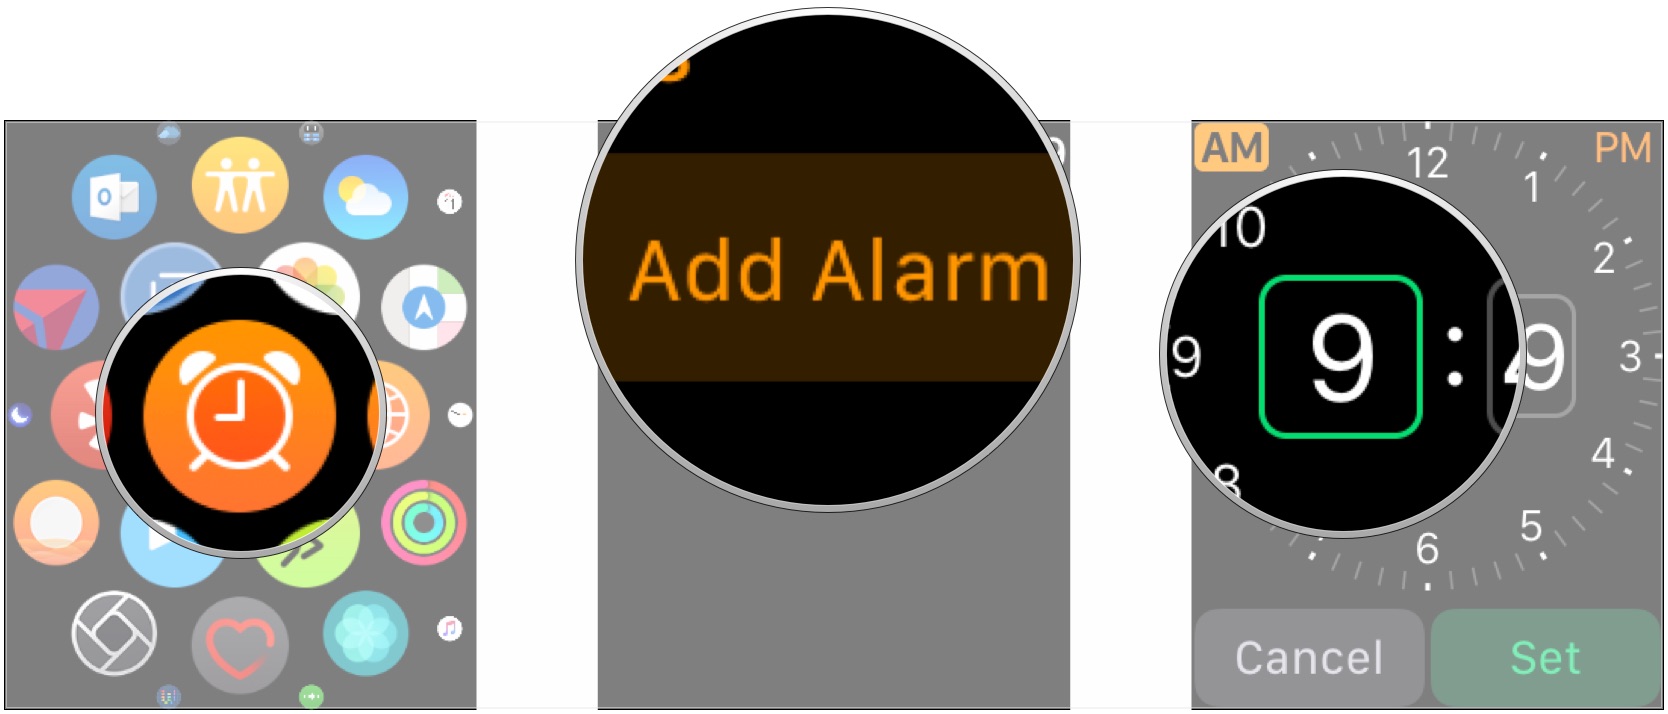 Open Alarms, tap Add Alarm, tap hour square